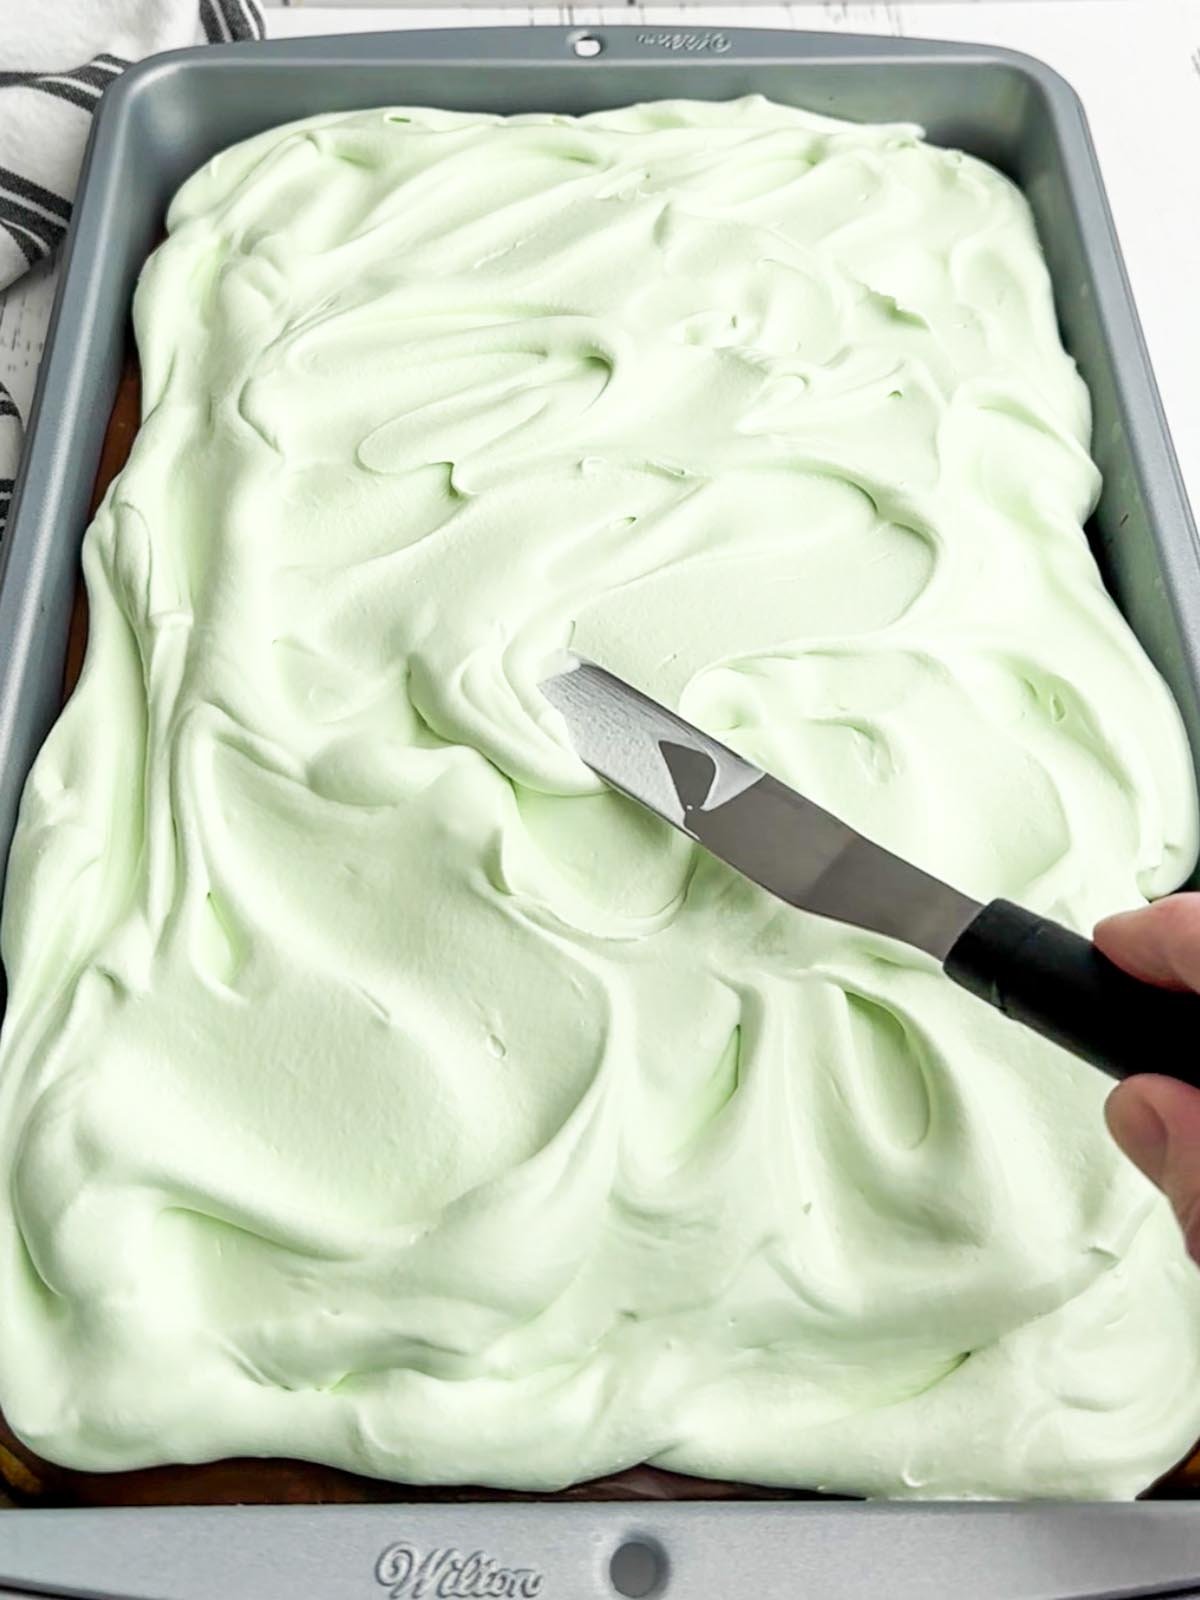 hand holding a spatula spreading green Cool Whip on top of cake